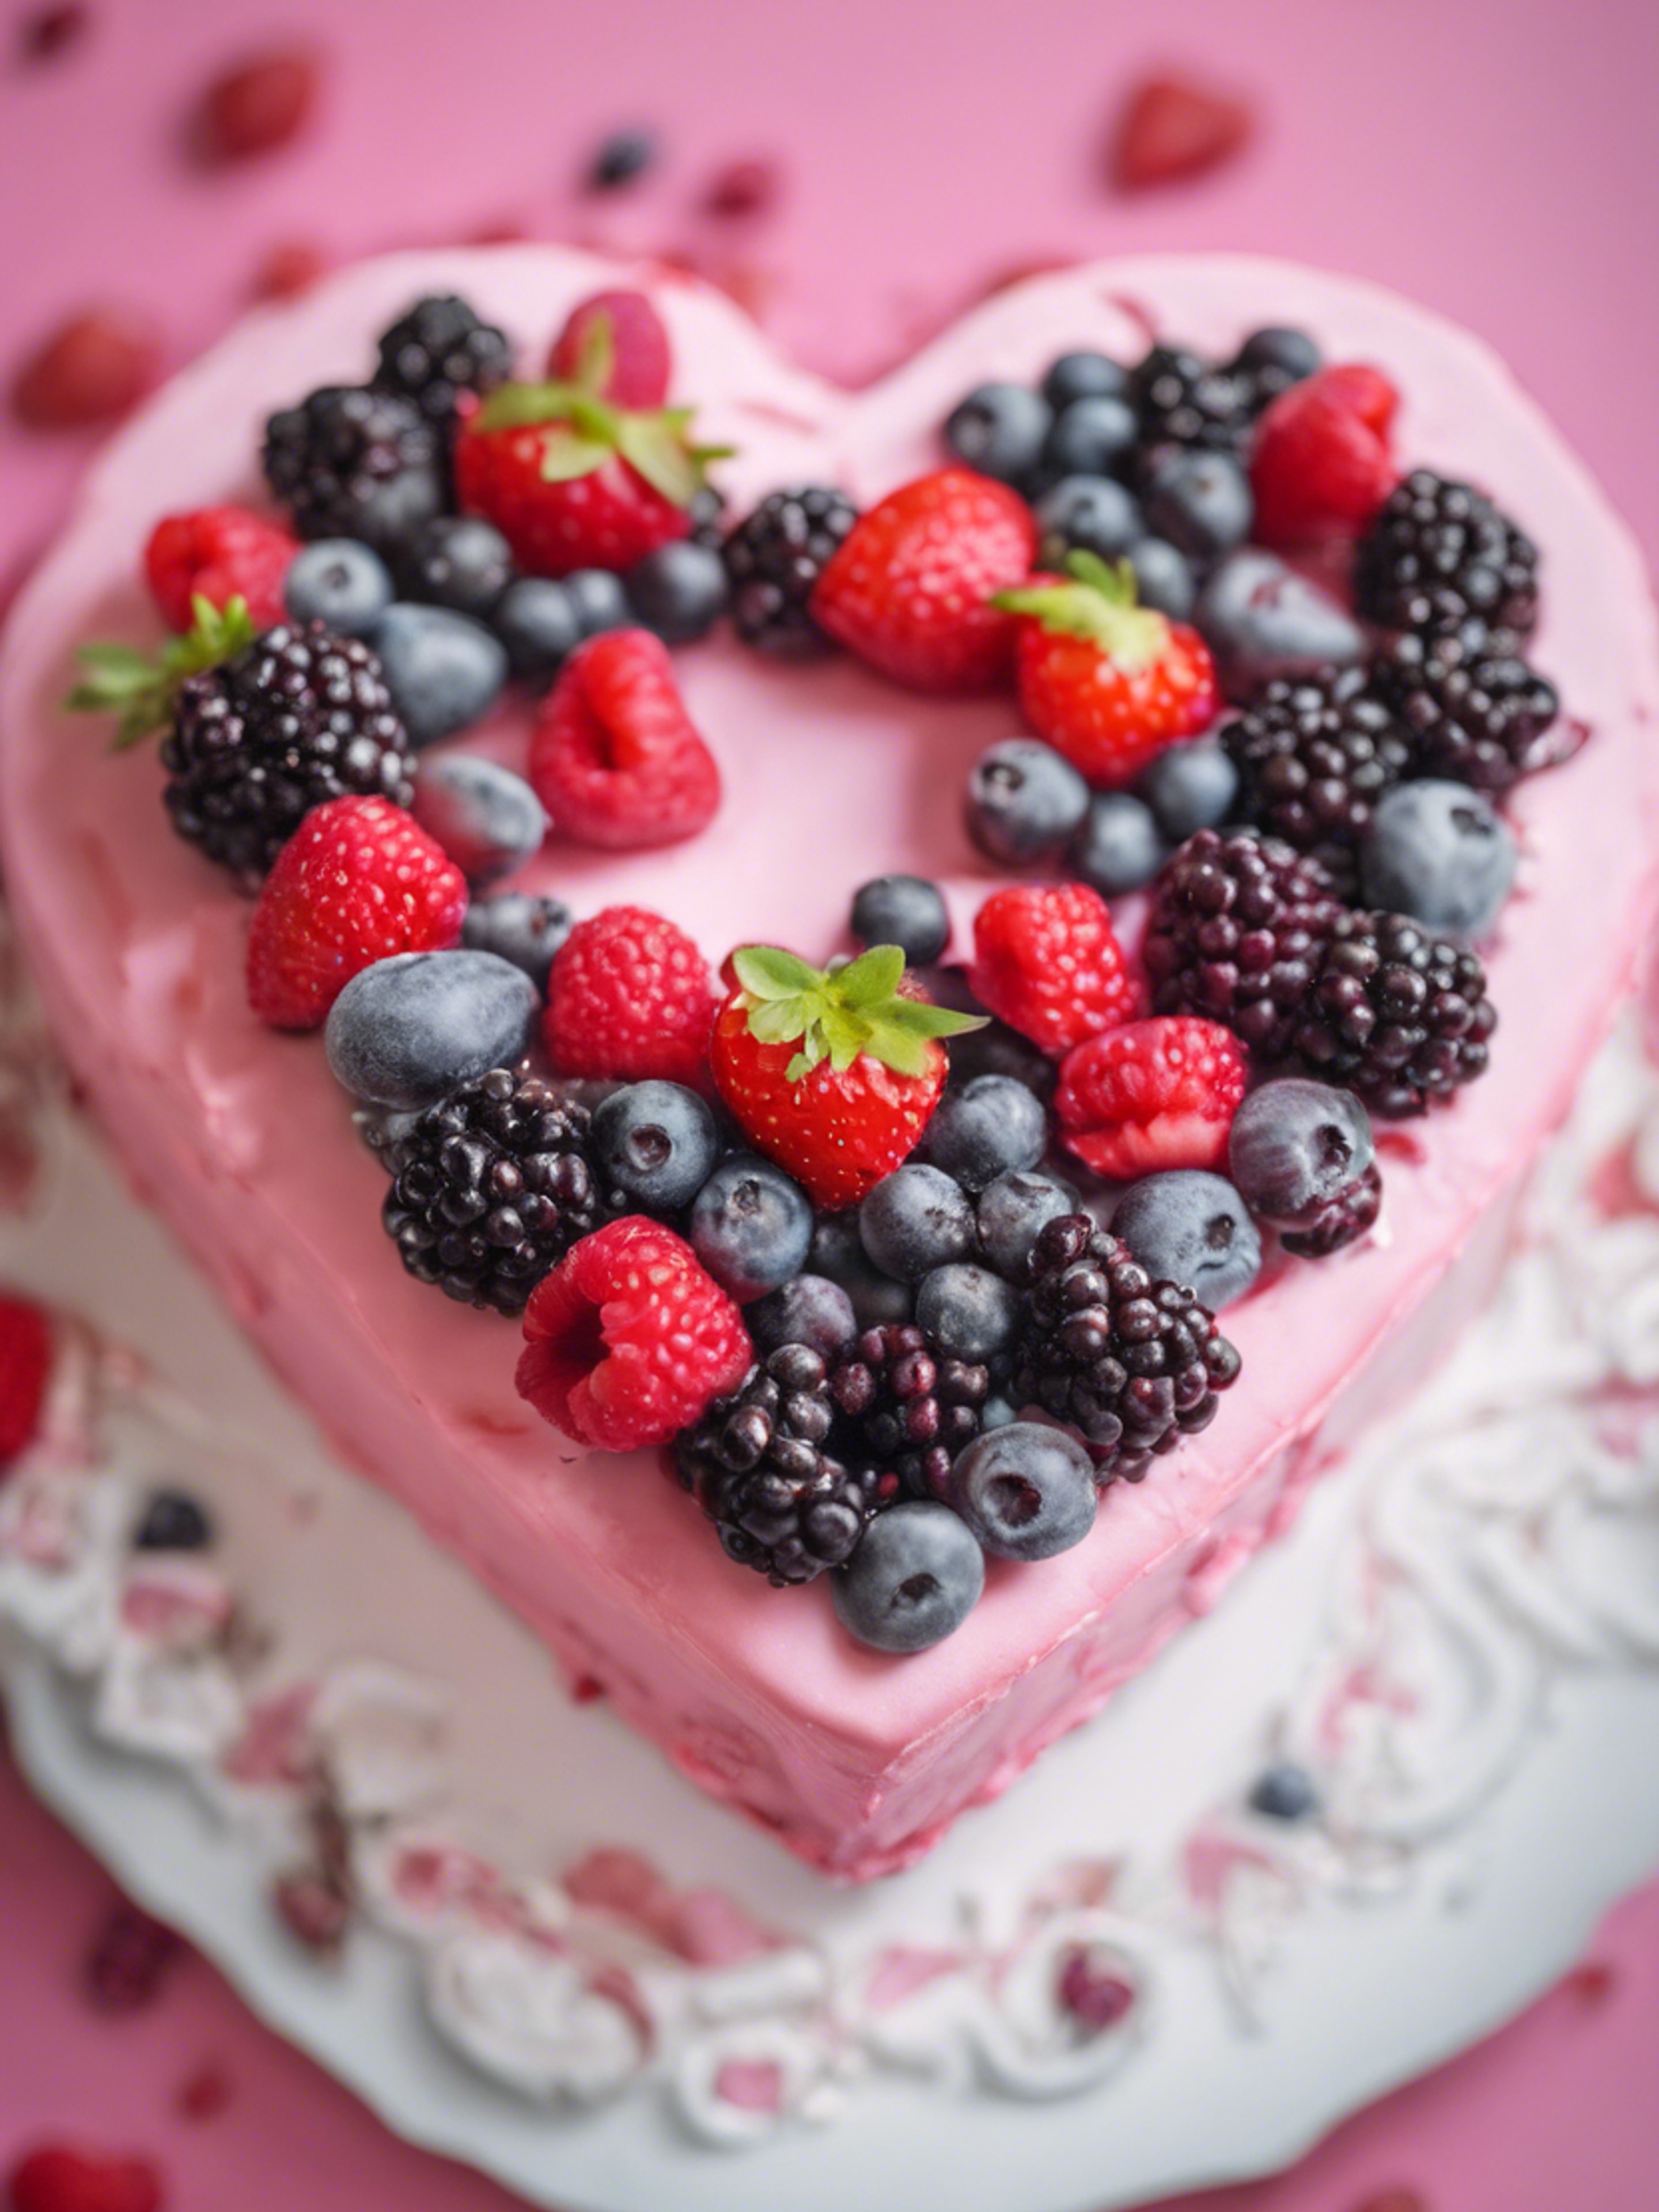 A pink heart shaped cake topped with assorted berries.壁紙[c4a6a00ea89247258077]